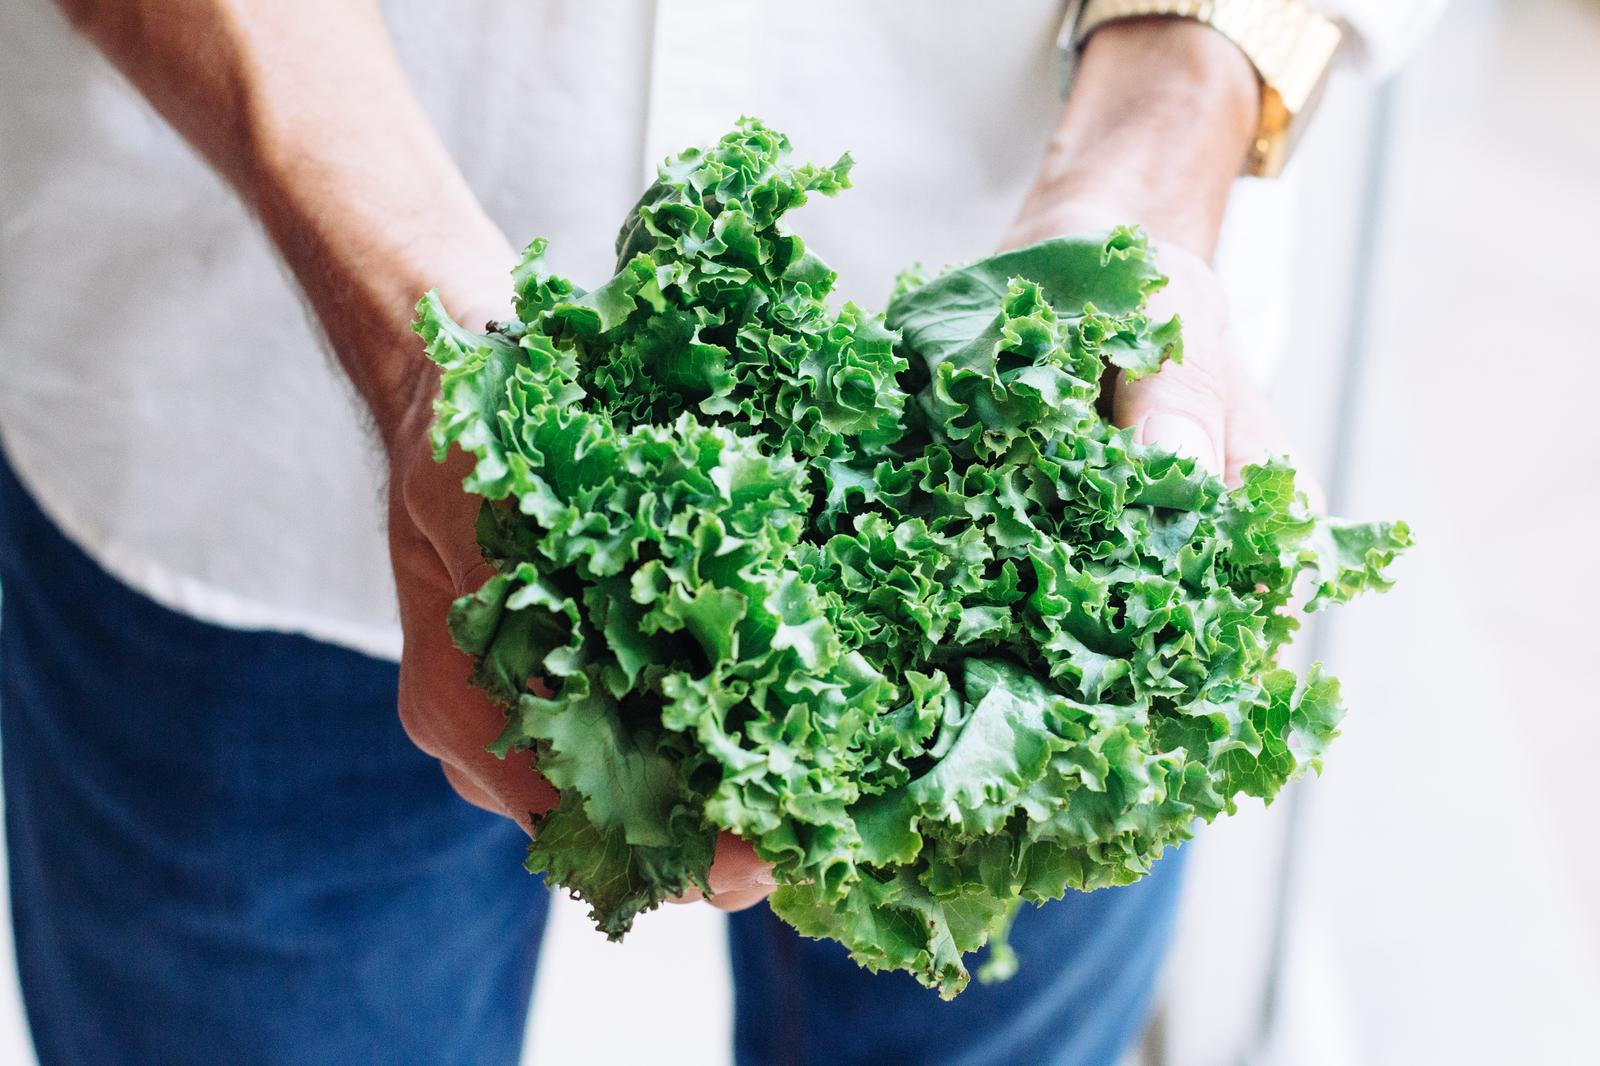 This 25-Question General Knowledge Quiz Will Determine If You Know a Little or a Lot Kale